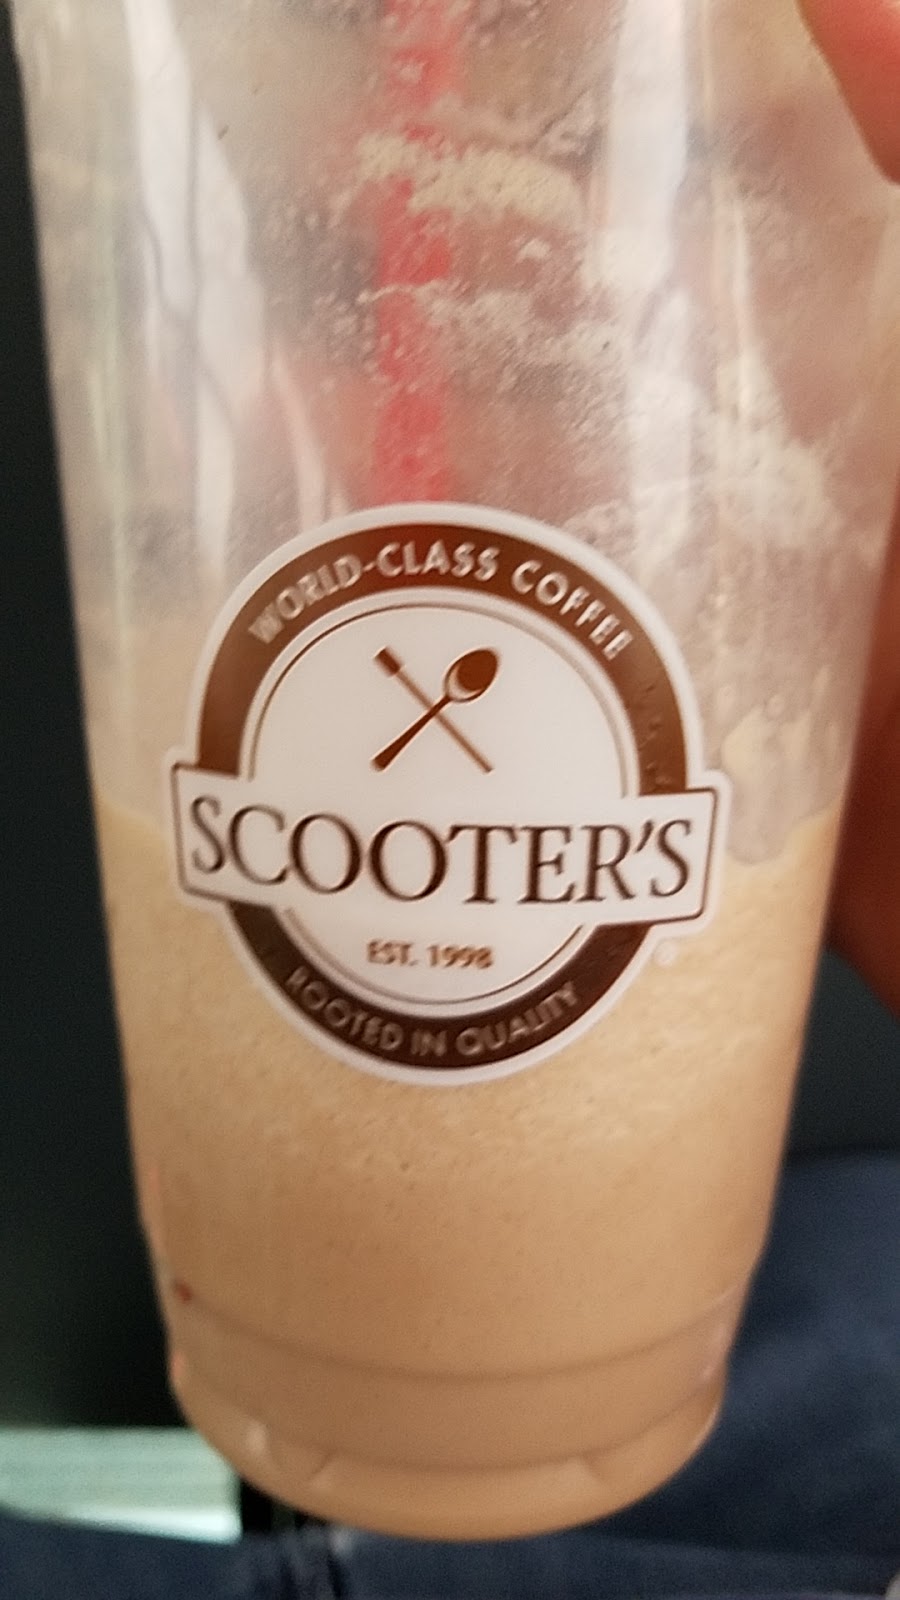 Scooters Coffee | 291 Hwy. &, East 23rd St S, Independence, MO 64055 | Phone: (816) 252-2326